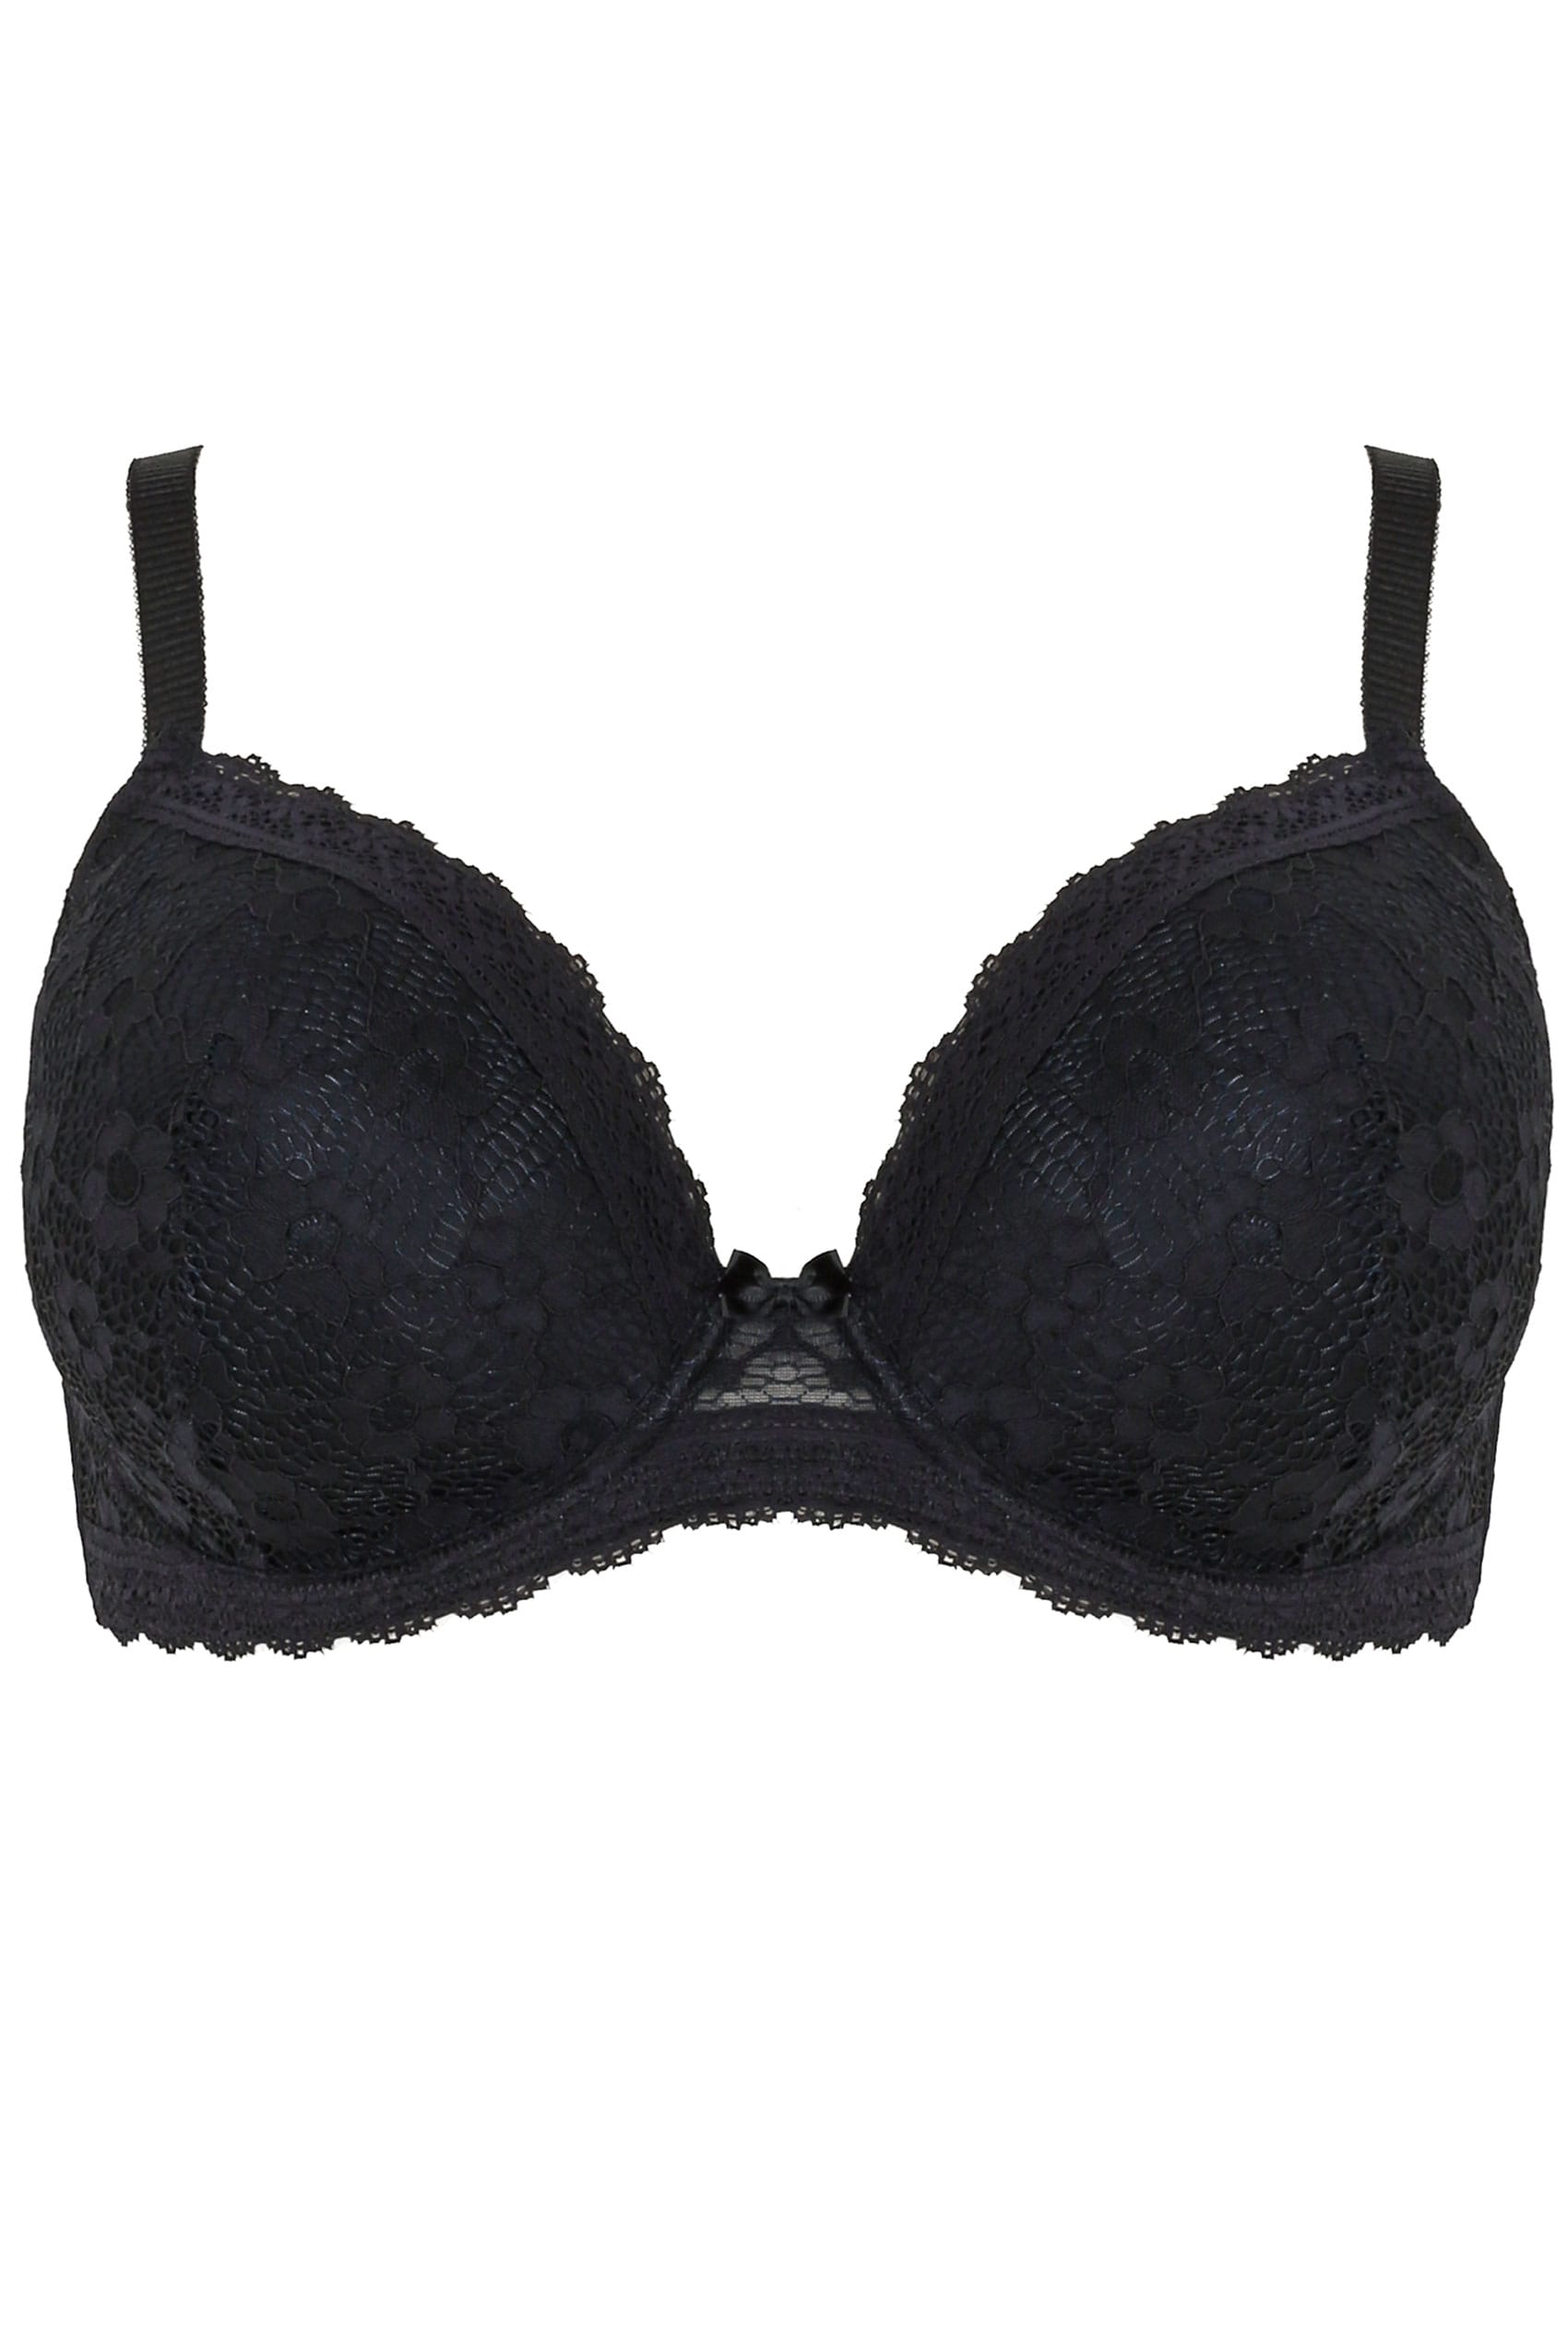 Black Daisy Lace Underwired Padded Bra